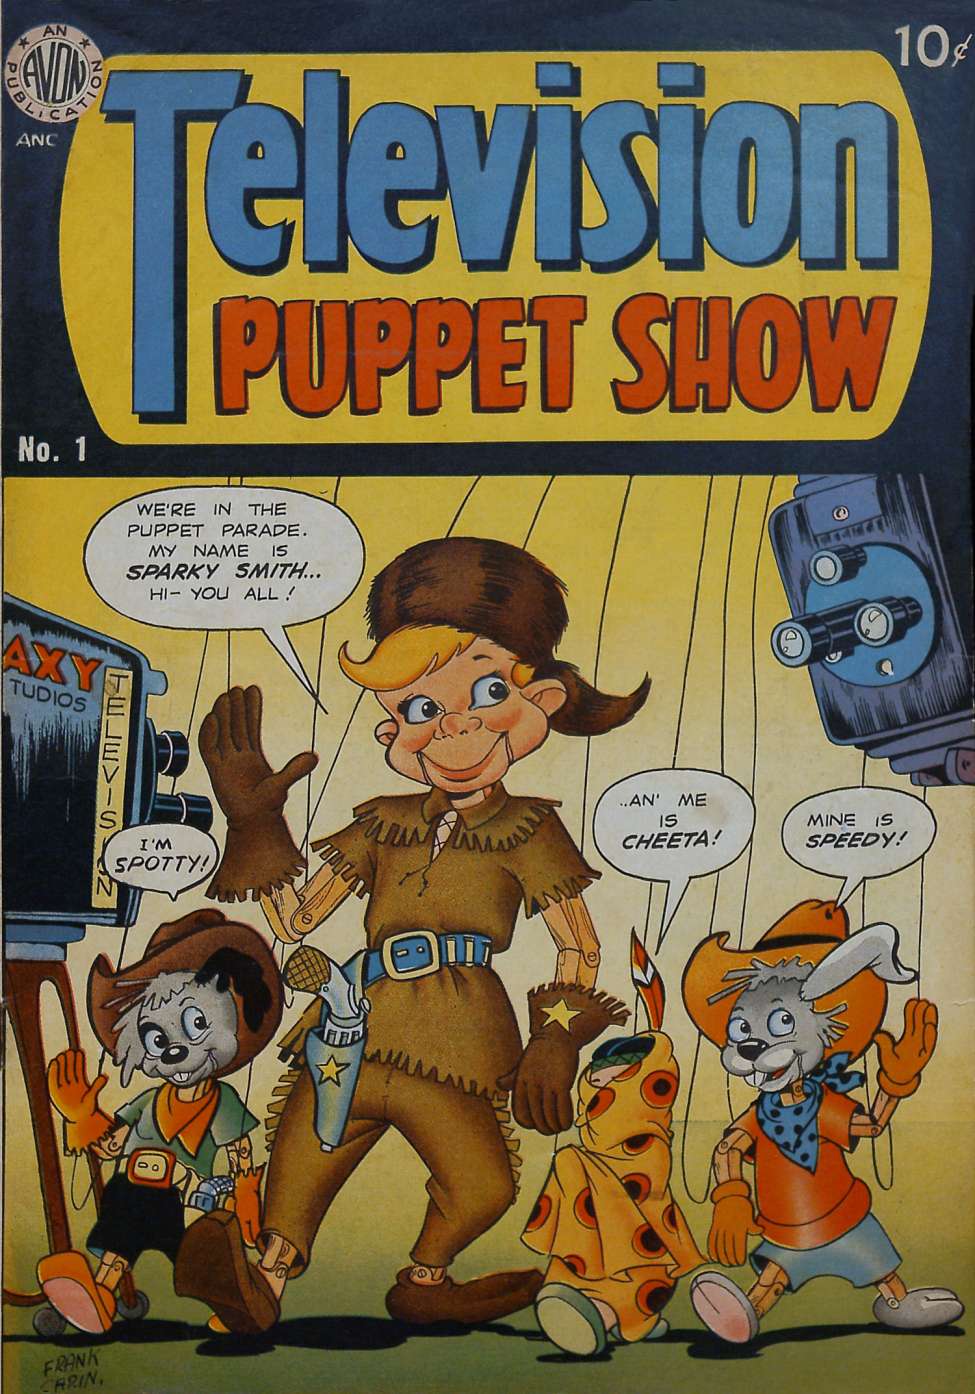 Comic Book Cover For Television Puppet Show 1